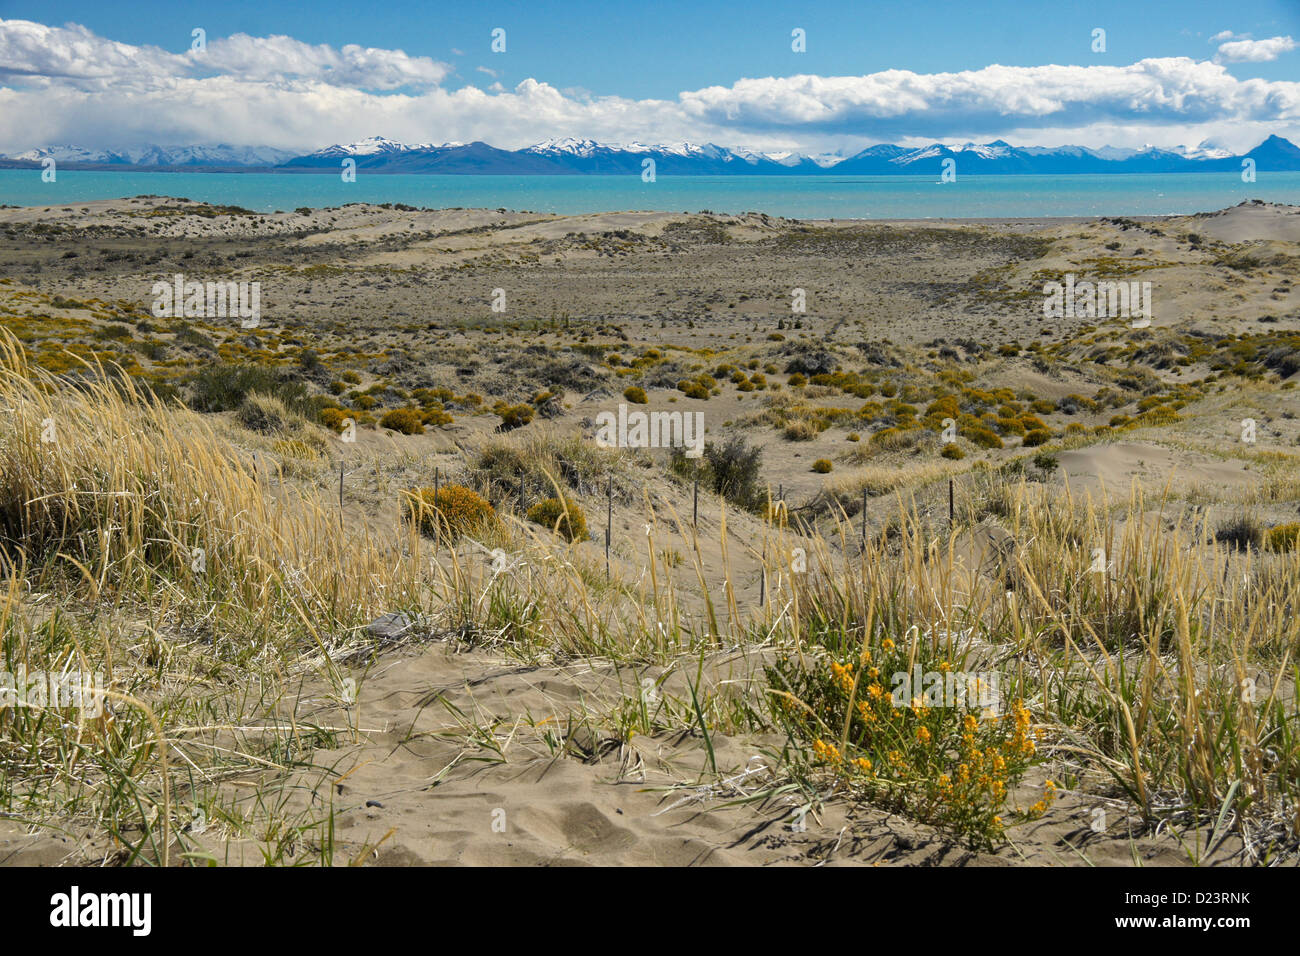 Lago Viedma and Andes Mountains, Patagonia, Argentina Stock Photo